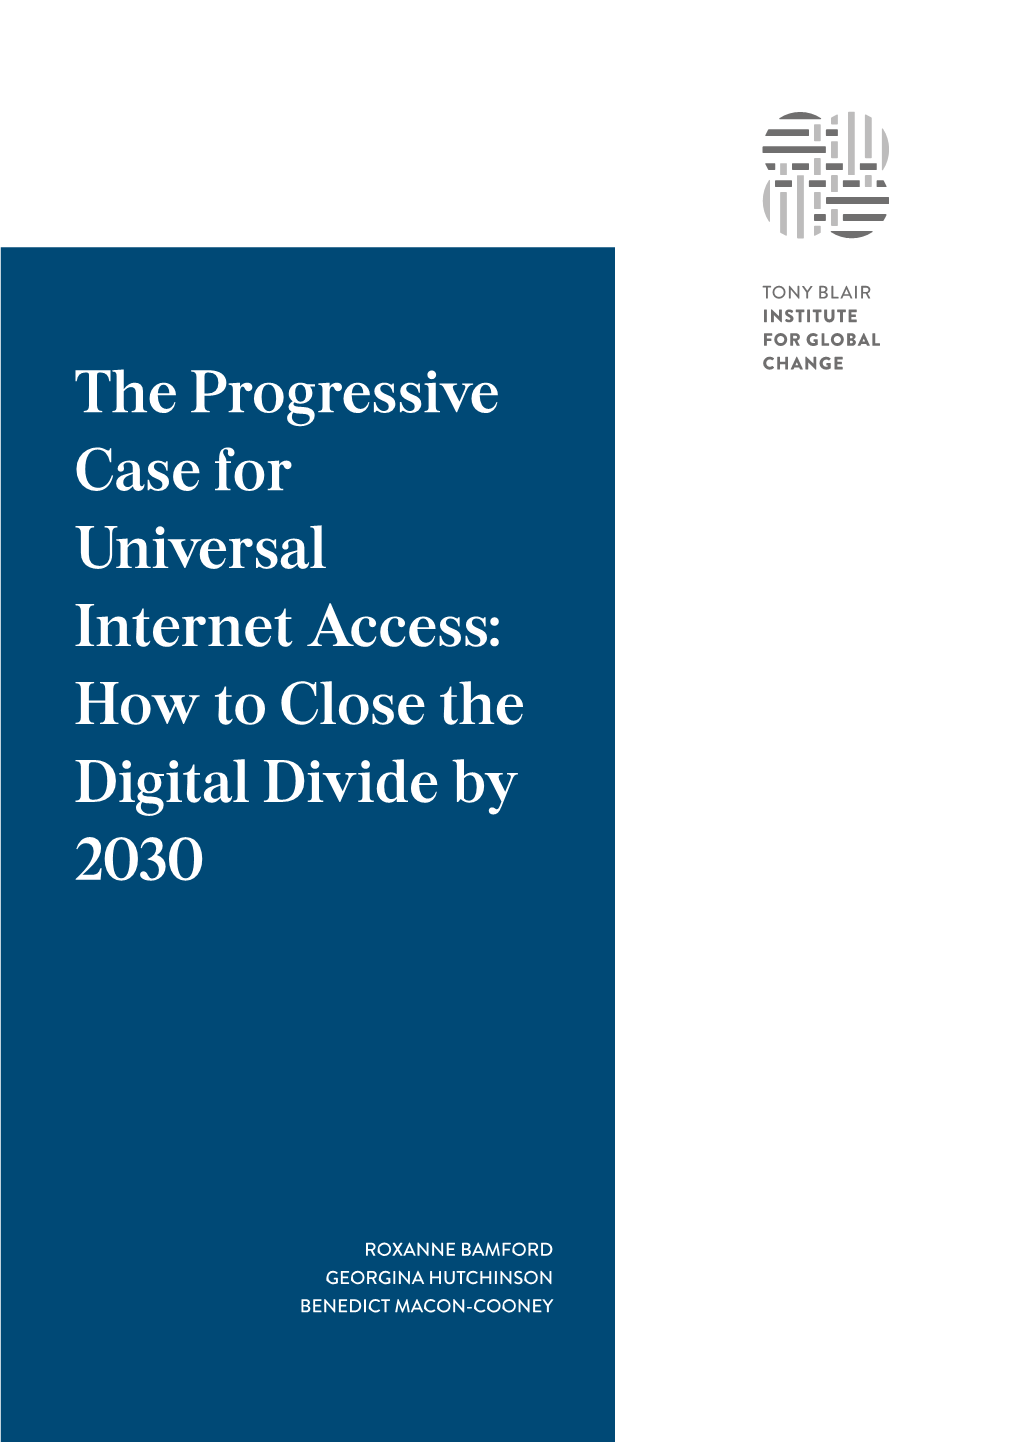 The Progressive Case for Universal Internet Access: How to Close the Digital Divide by 2030